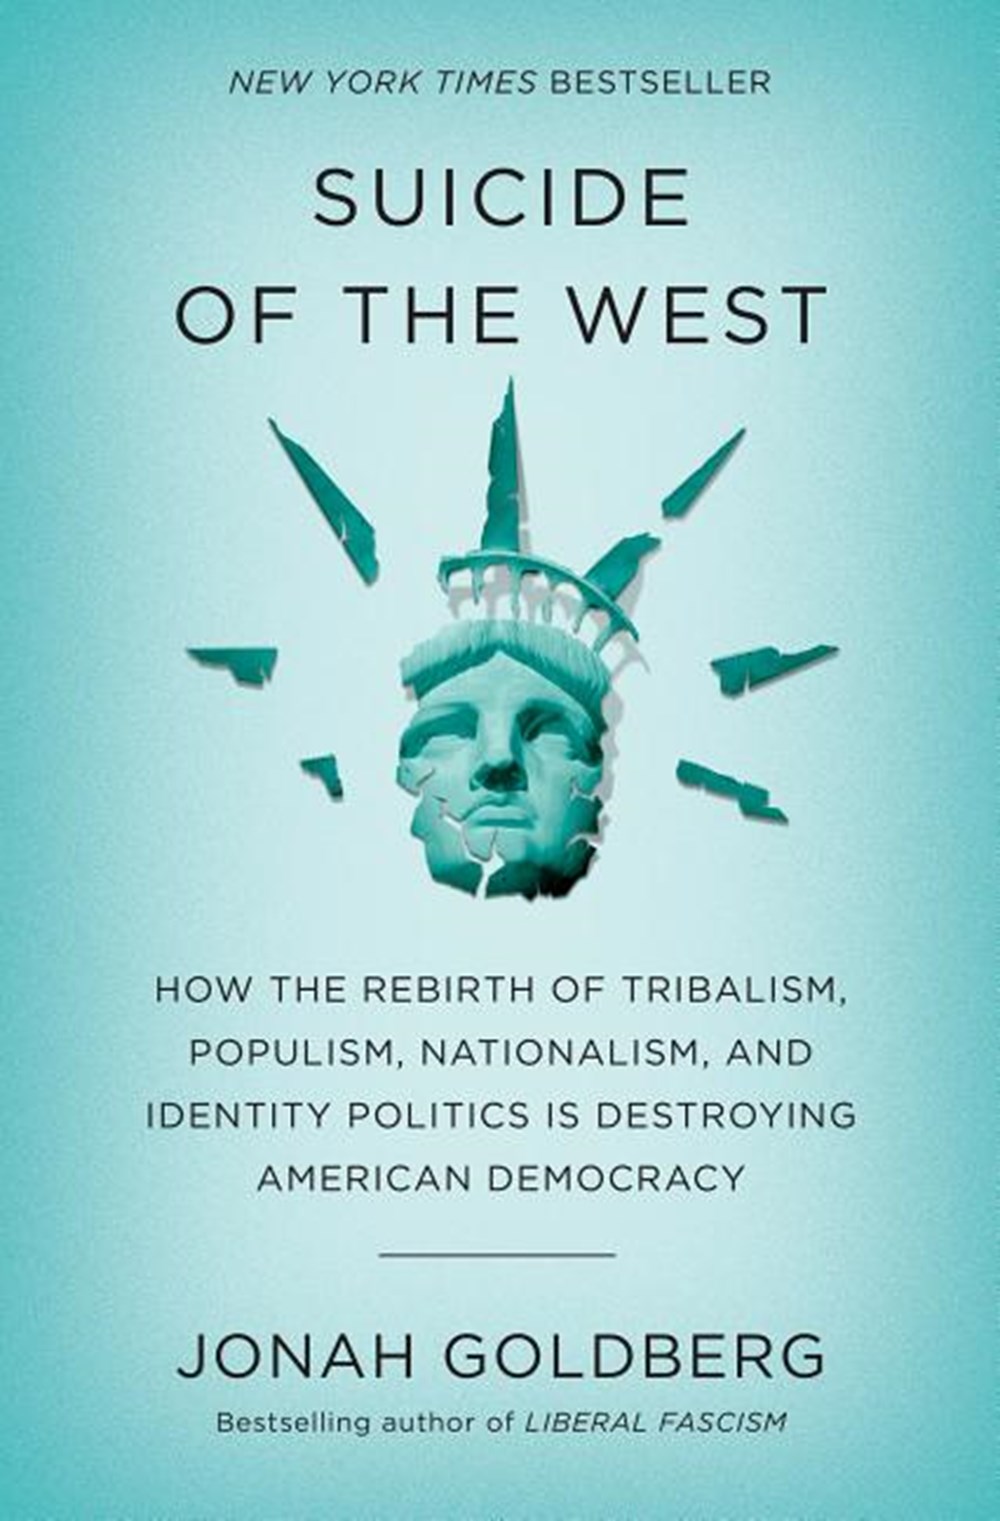 Suicide of the West: How the Rebirth of Tribalism, Populism, Nationalism, and Identity Politics Is D